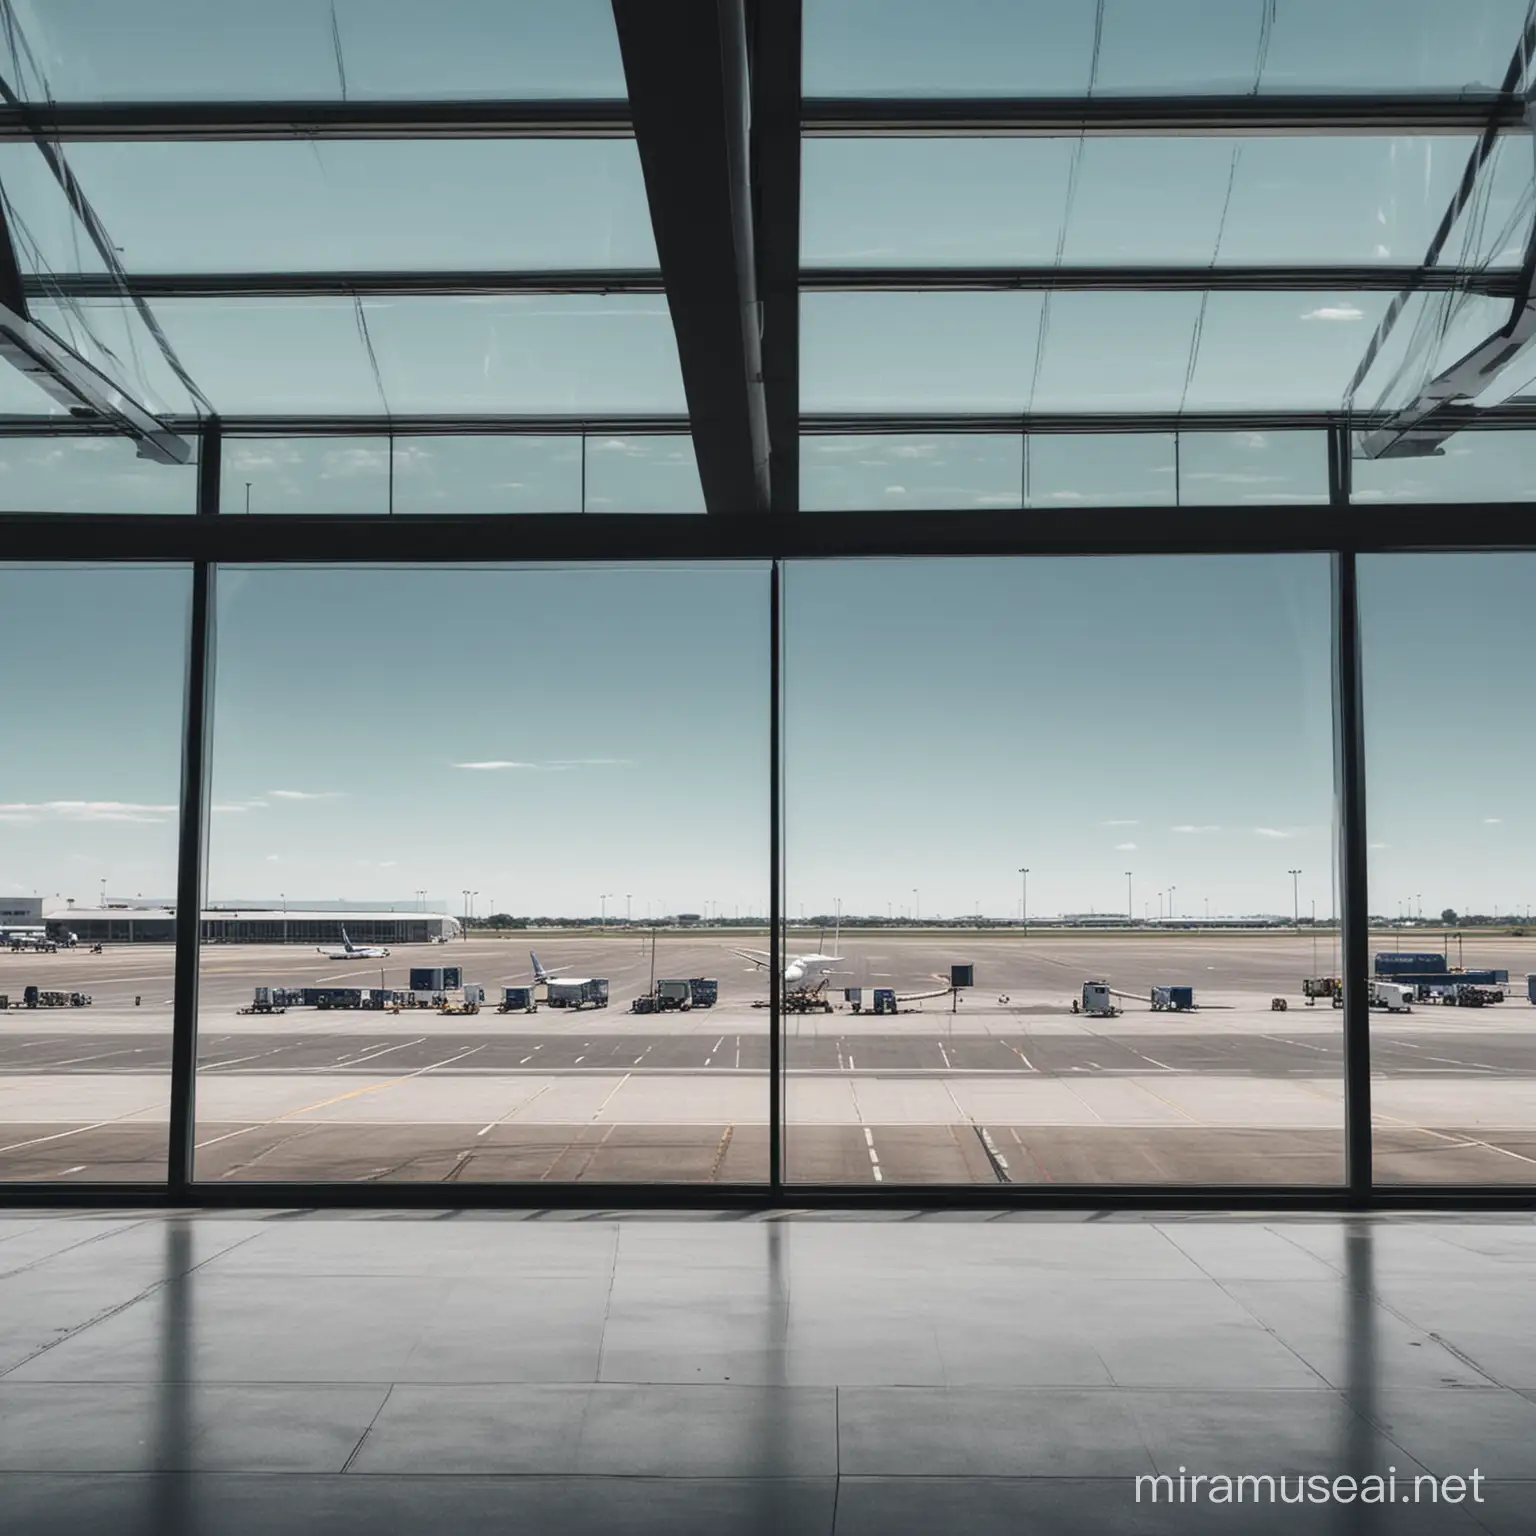 create me an image of the outside view of an empty airport 
